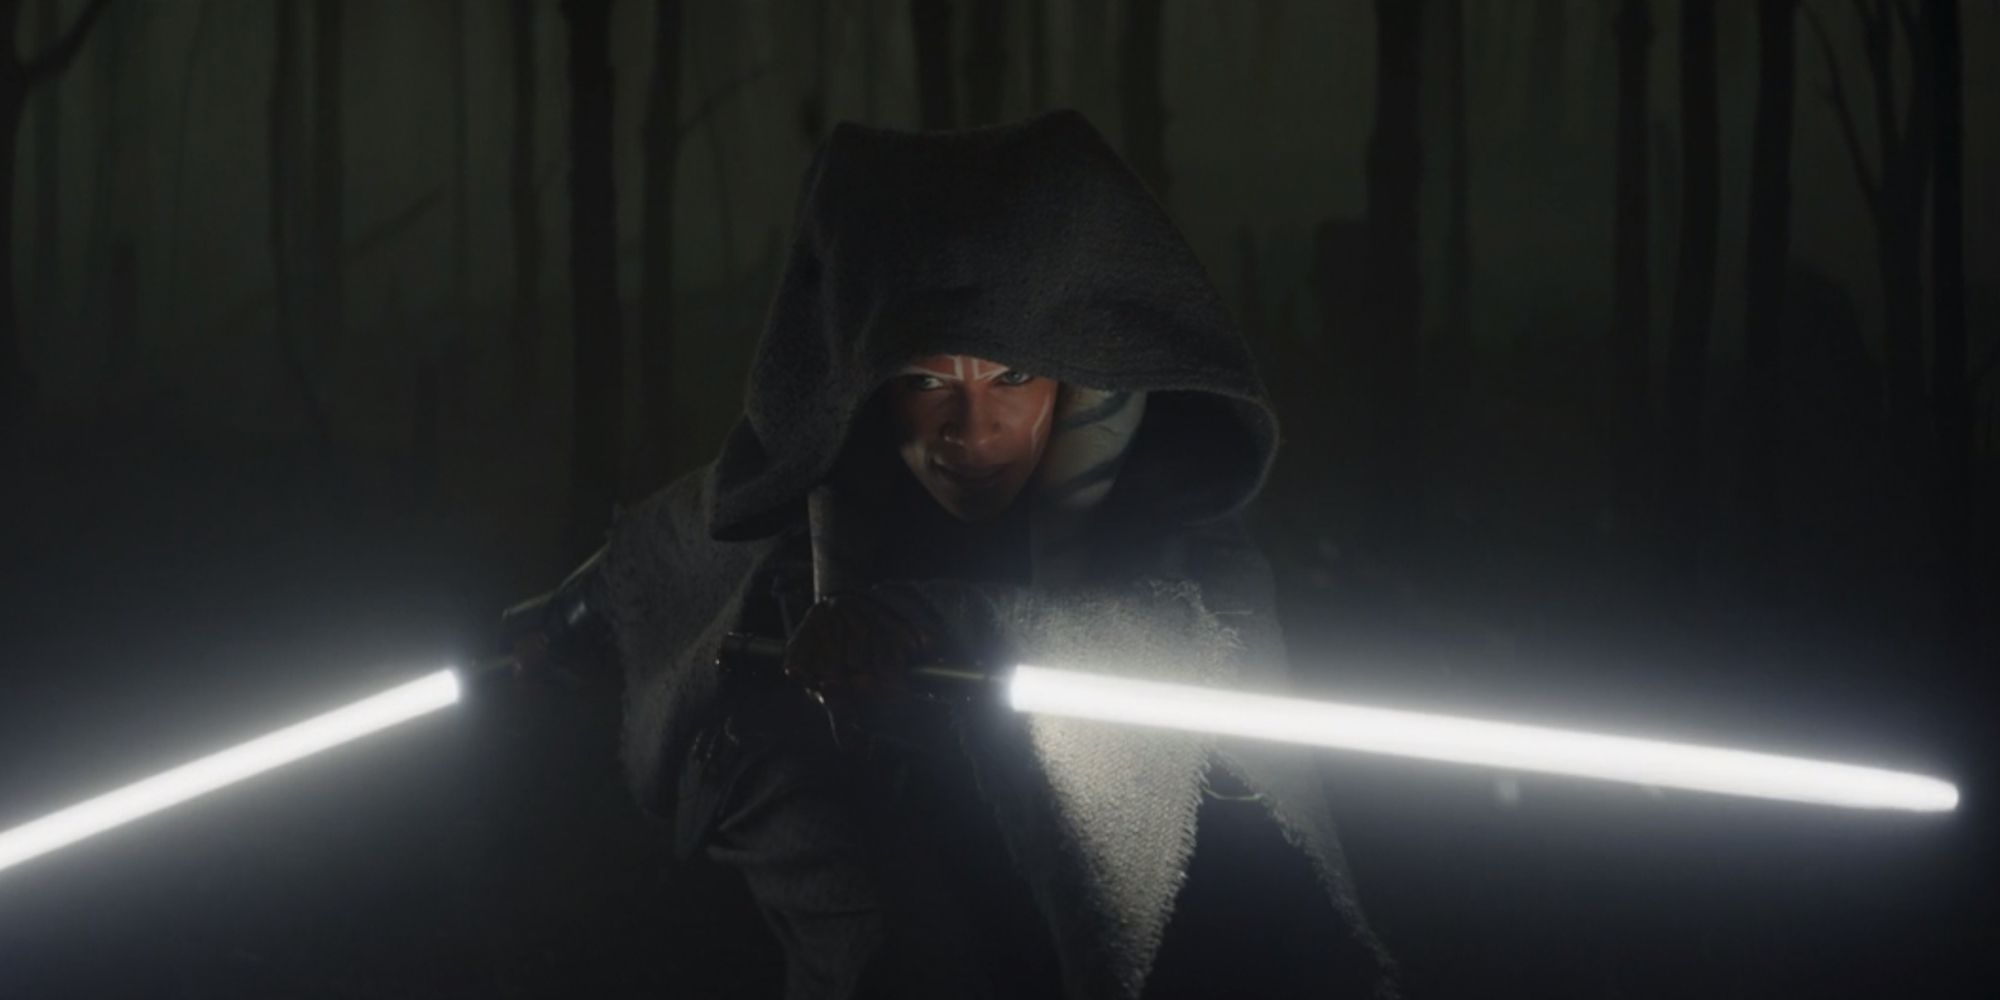 Ahsoka Tano wielding her white lightsabers in the forests of Corvus in The Mandalorian